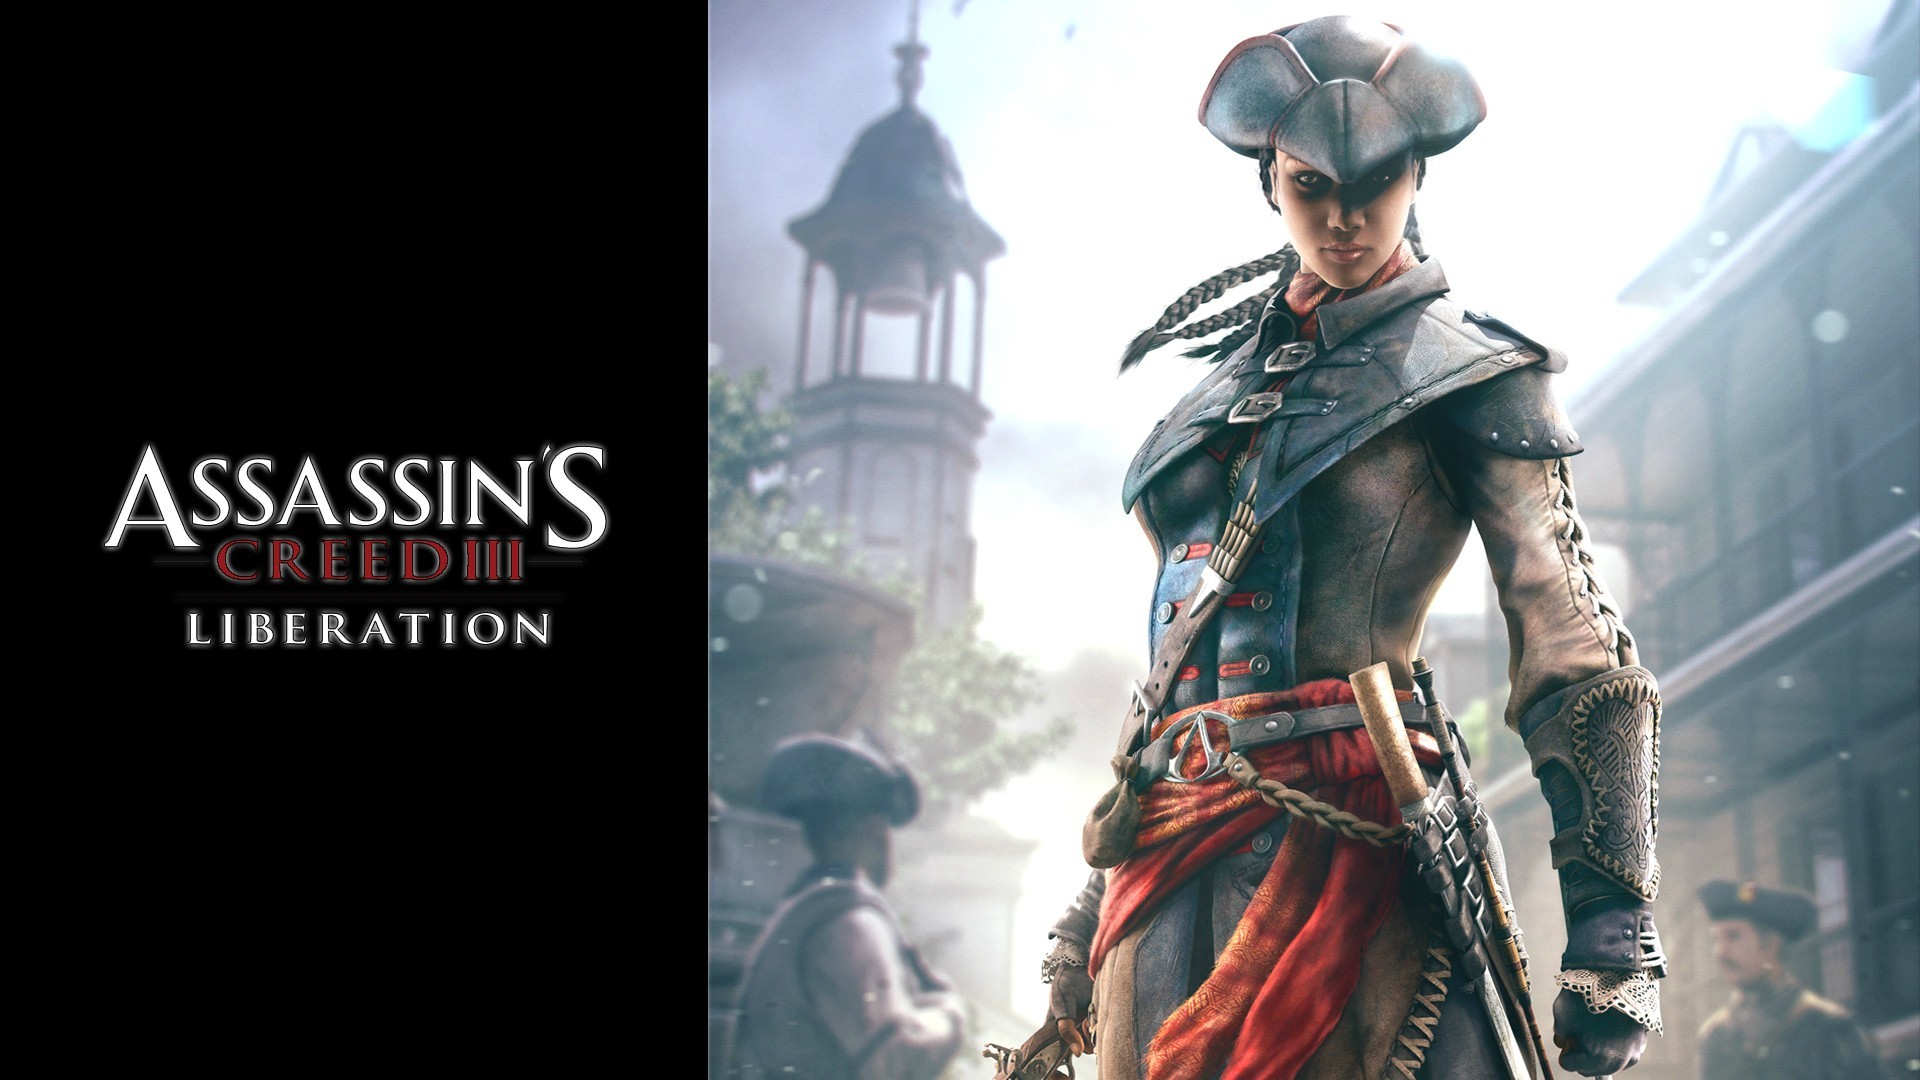 1920x1080 Assassin's Creed III: Liberation - 2 New Wallpapers